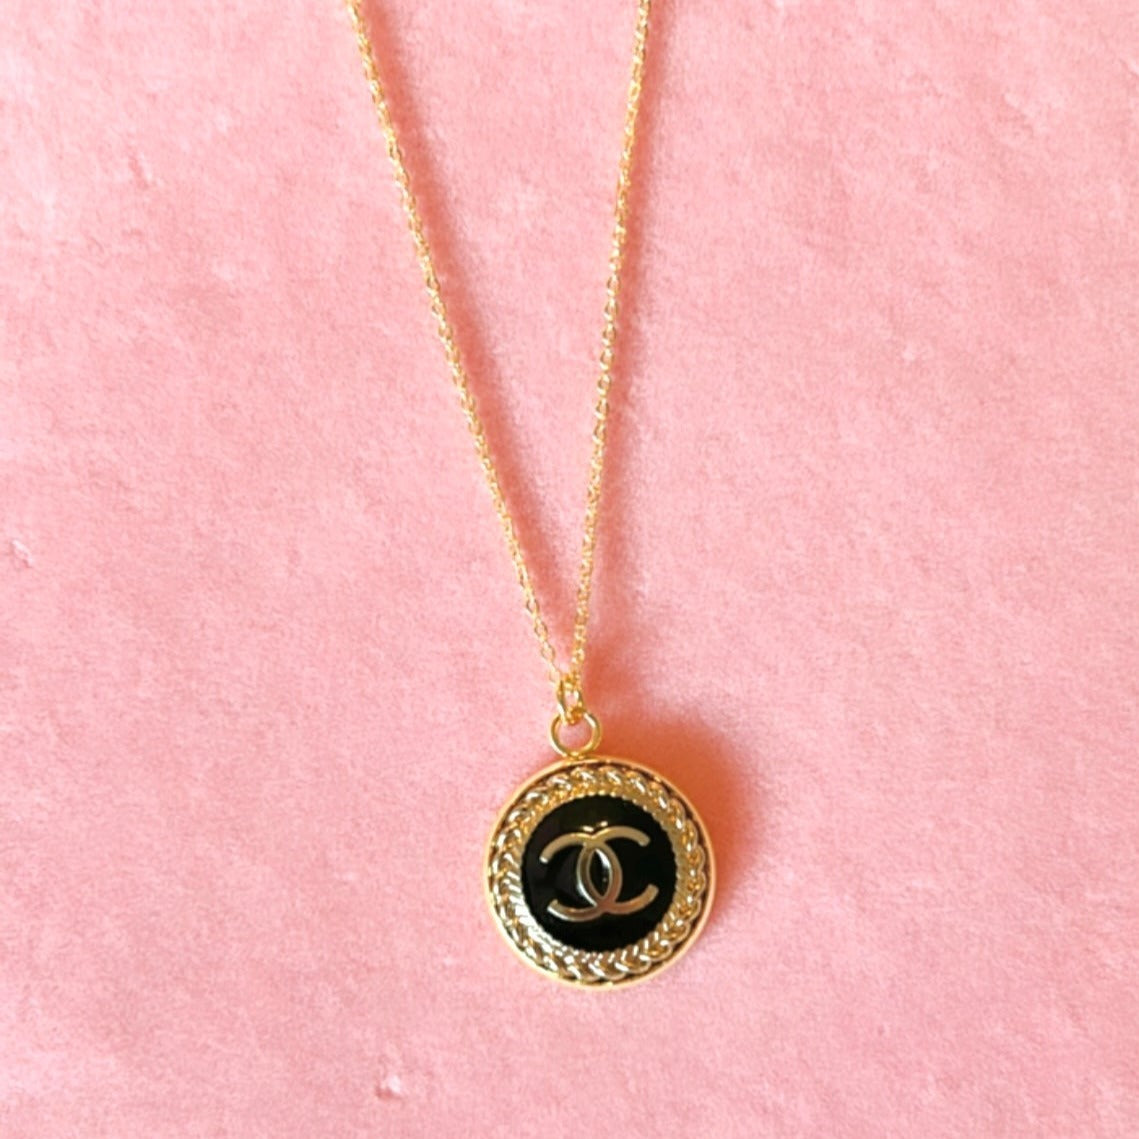 The Medallion Necklace in Black